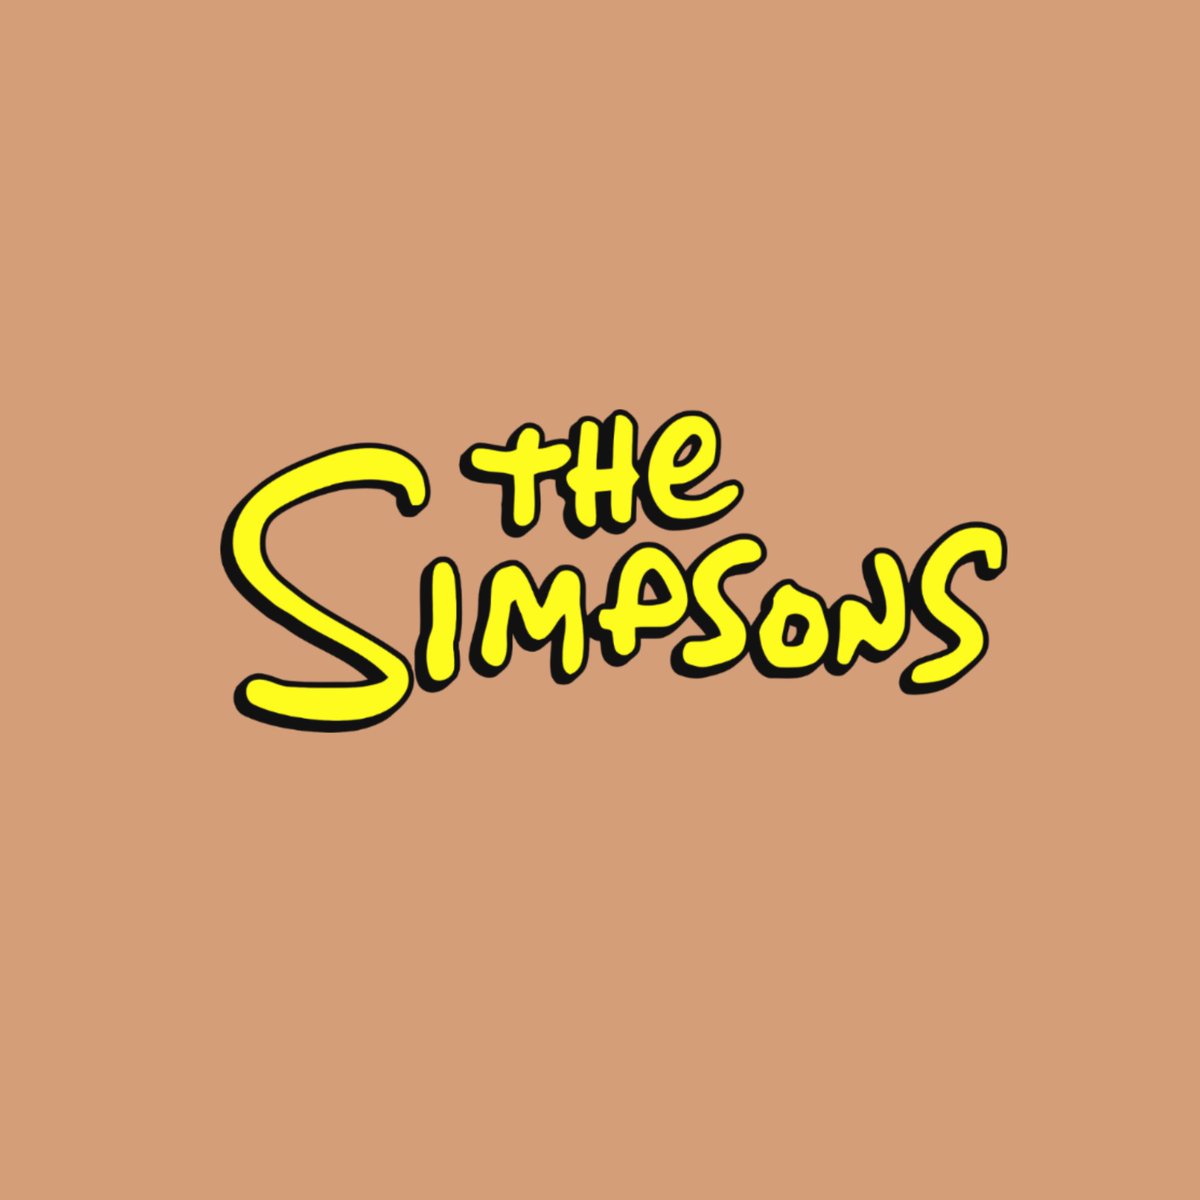 9. The Simpsons